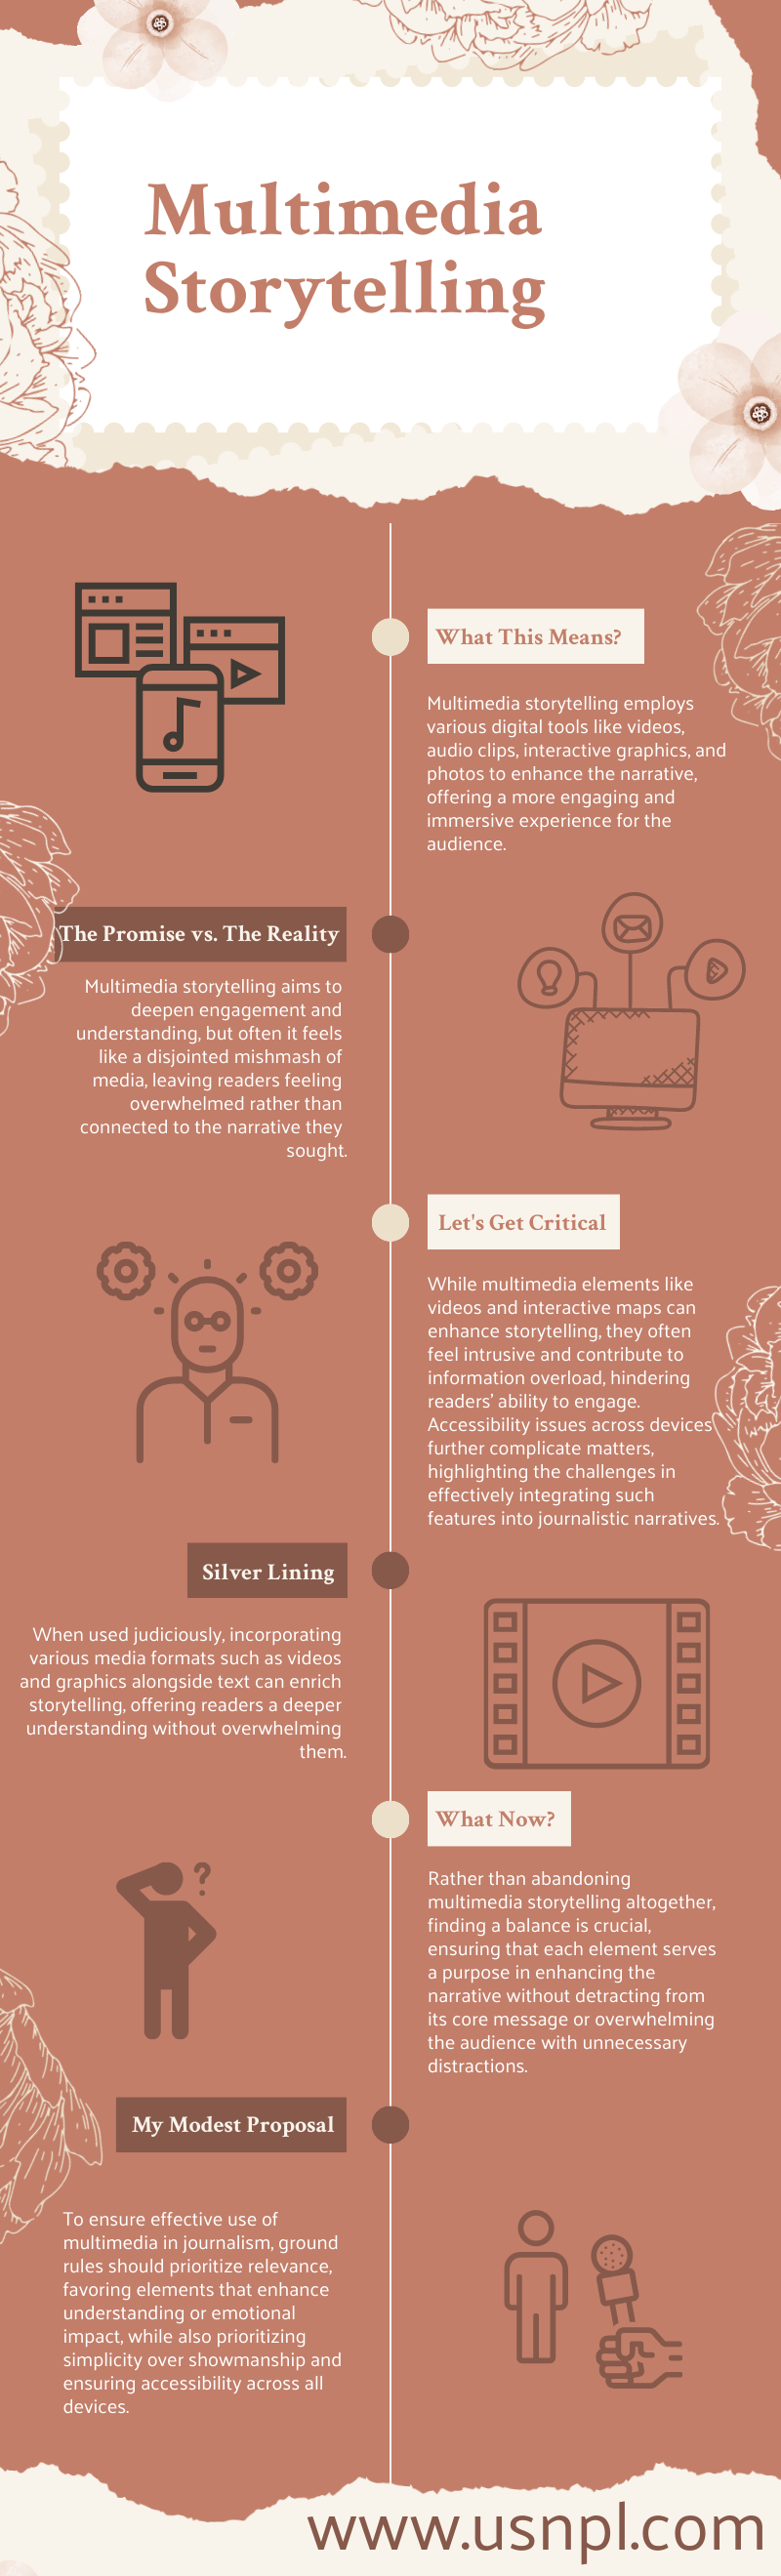 this infographic presents multimedia storytelling in journalism